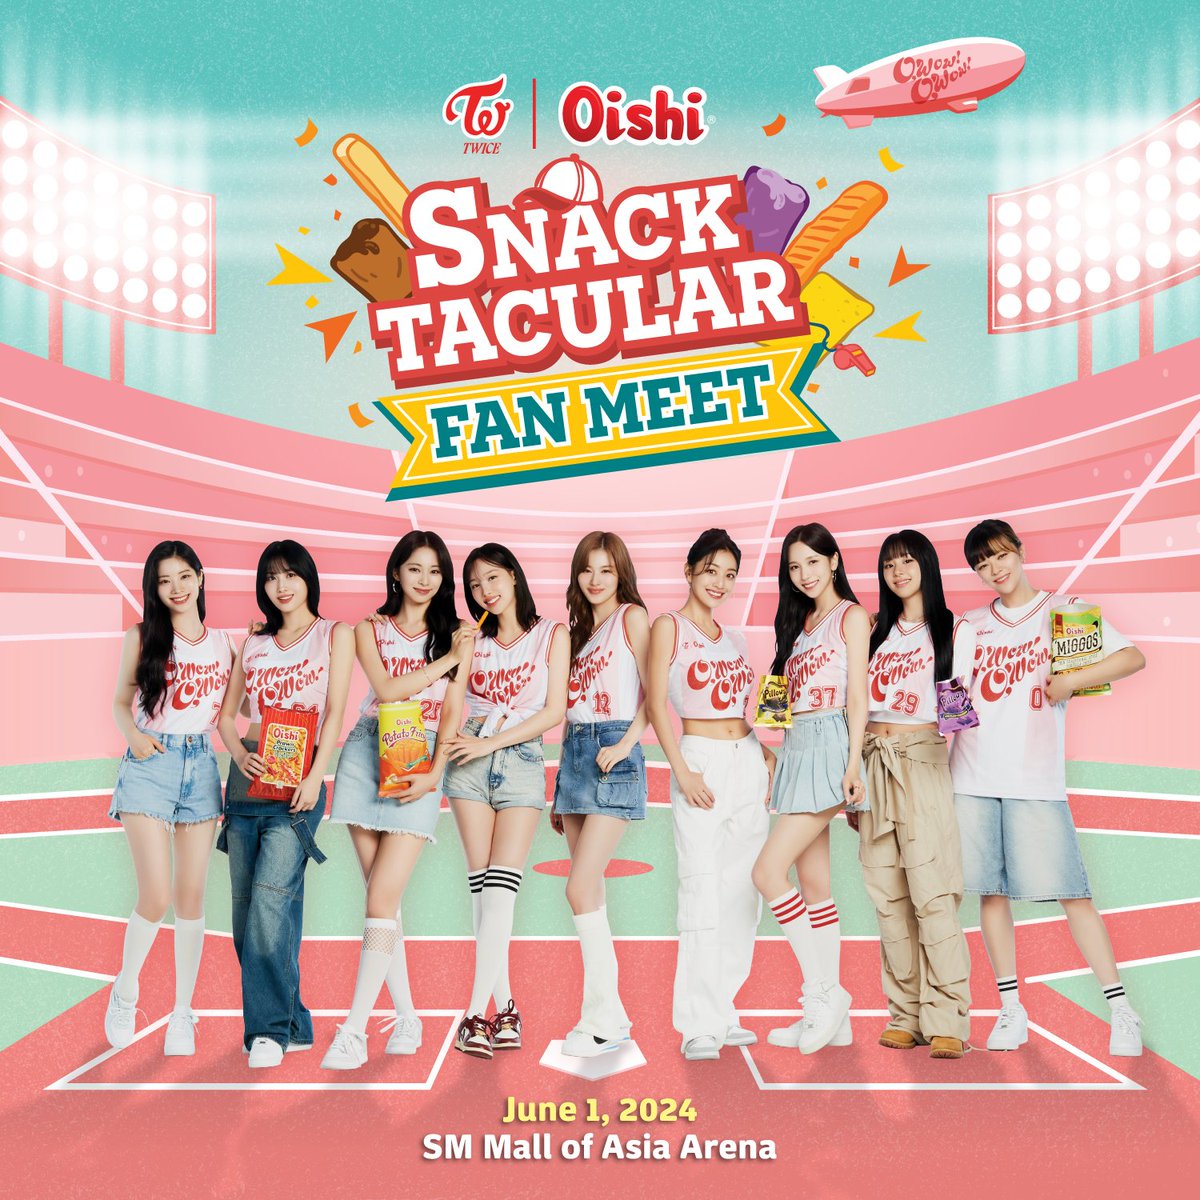 You asked for a fan meet? We GOT YOU, ONCEs! 🎉  Save the date for the #TWICExOISHISnacktacularFanMeet on June 1, 2024 at the SM Mall of Asia Arena.  JUST CHILL AND CHILL AND RELAX-LAX as more details will be revealed soon. 👀 #OWowOWow